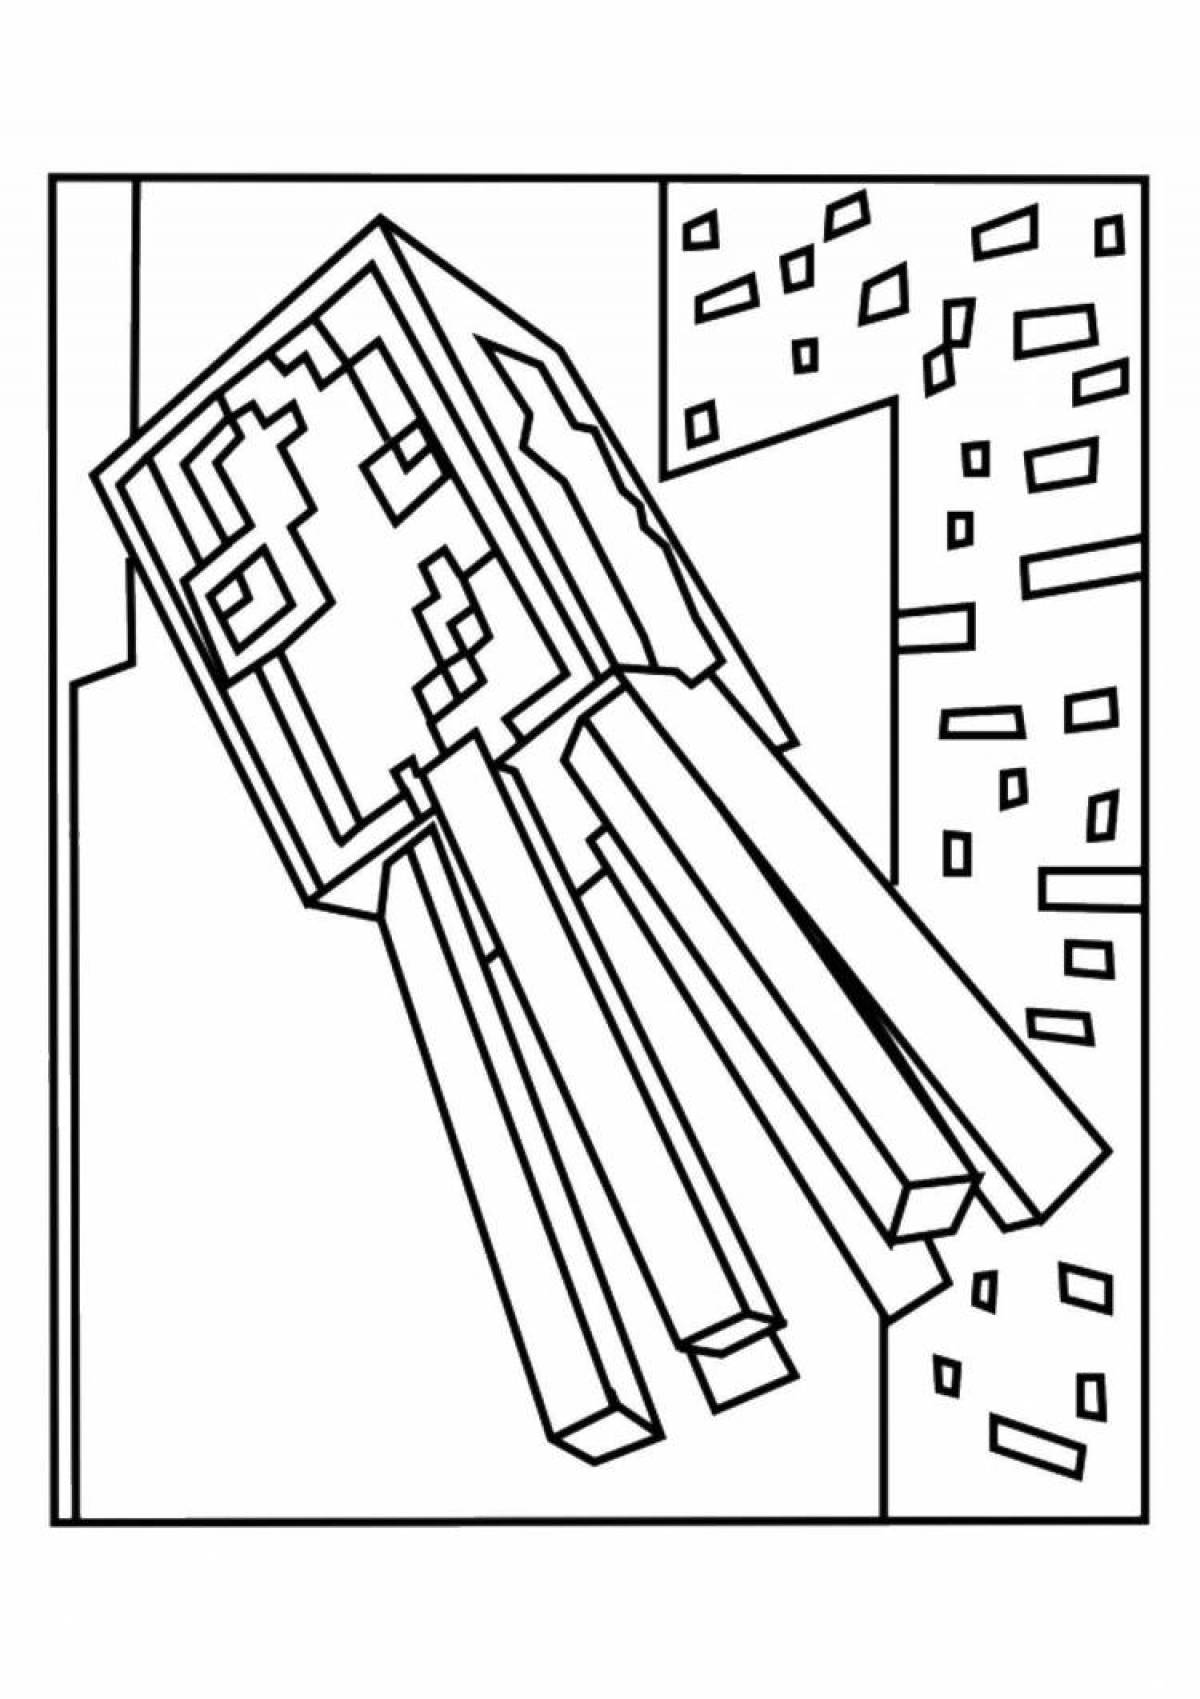 Enderman live coloring page